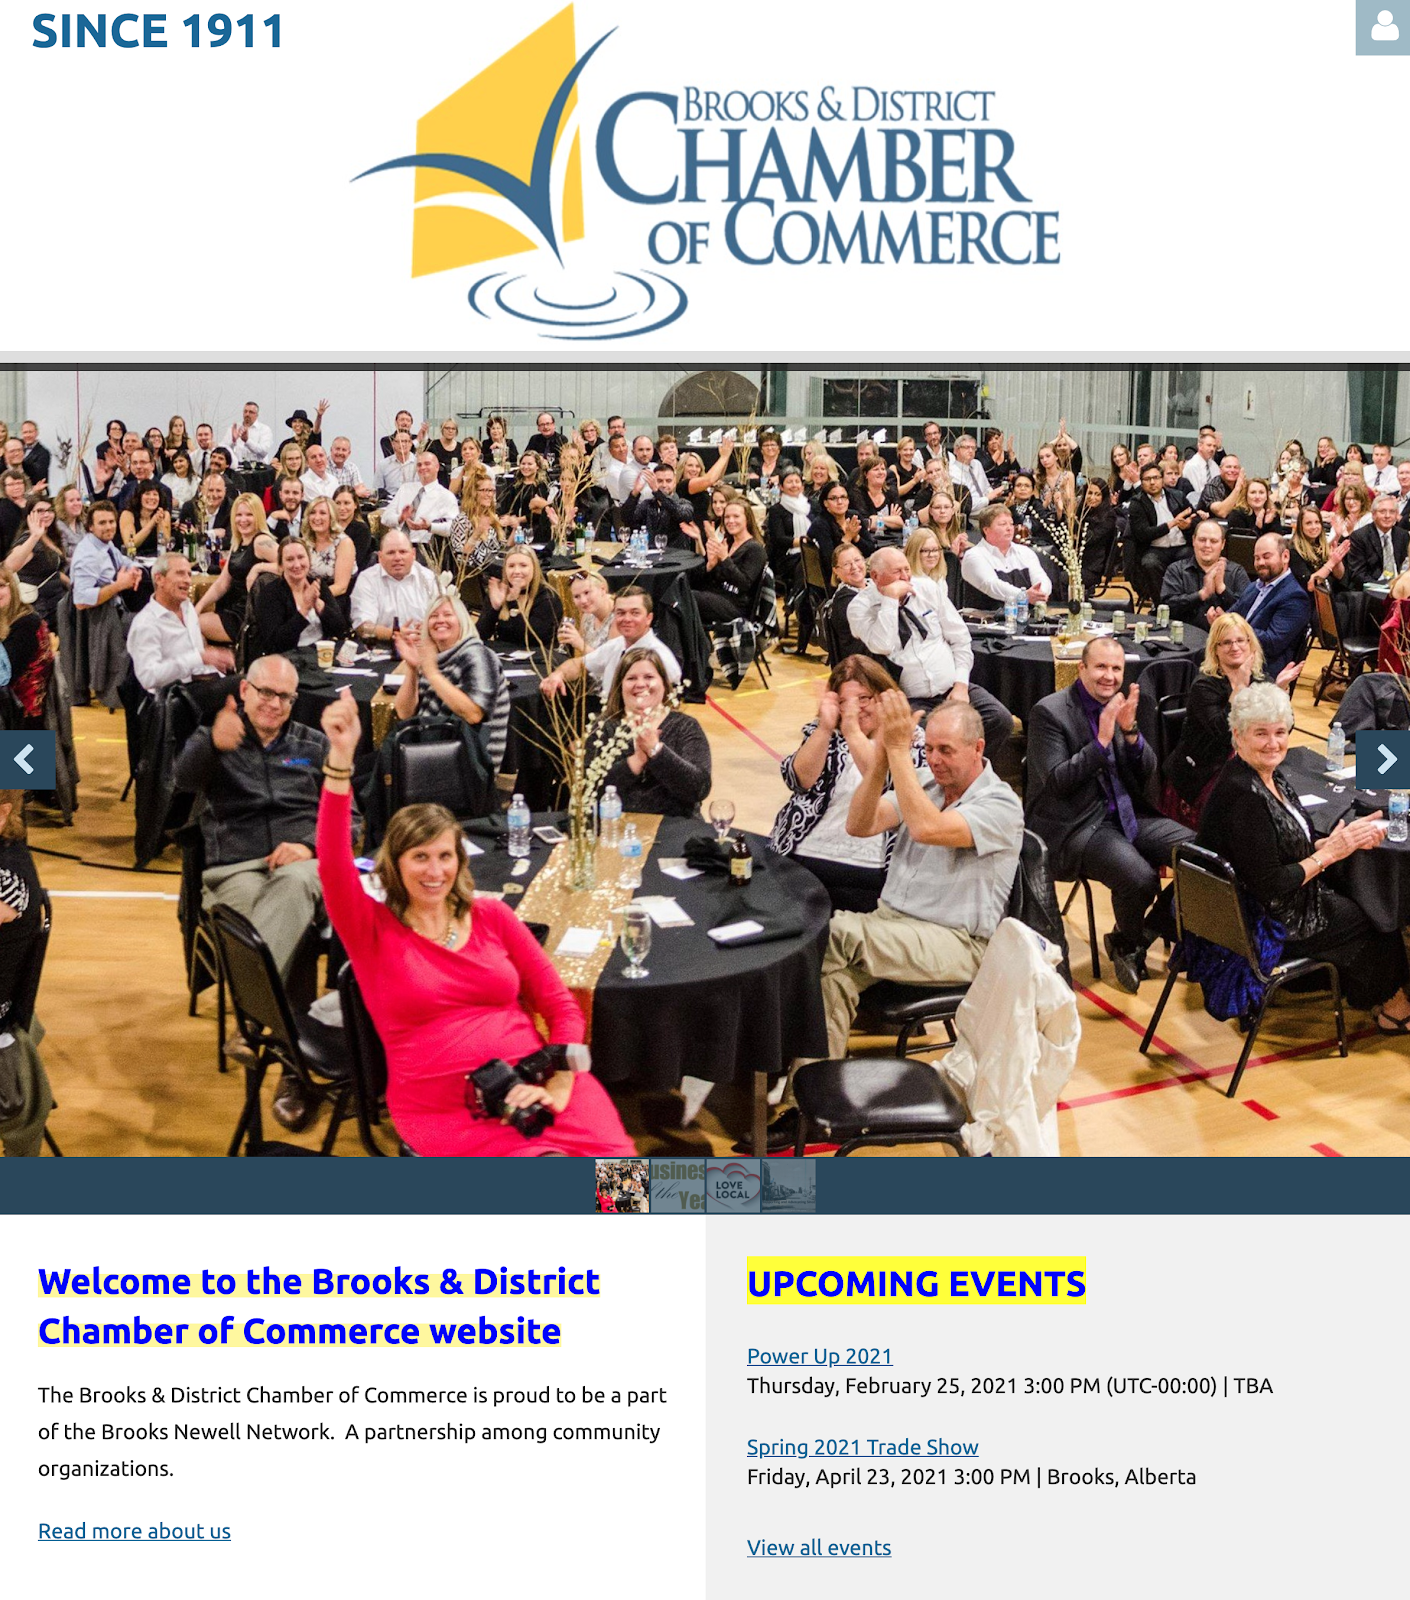 The Brooks & District Chamber of Commerce